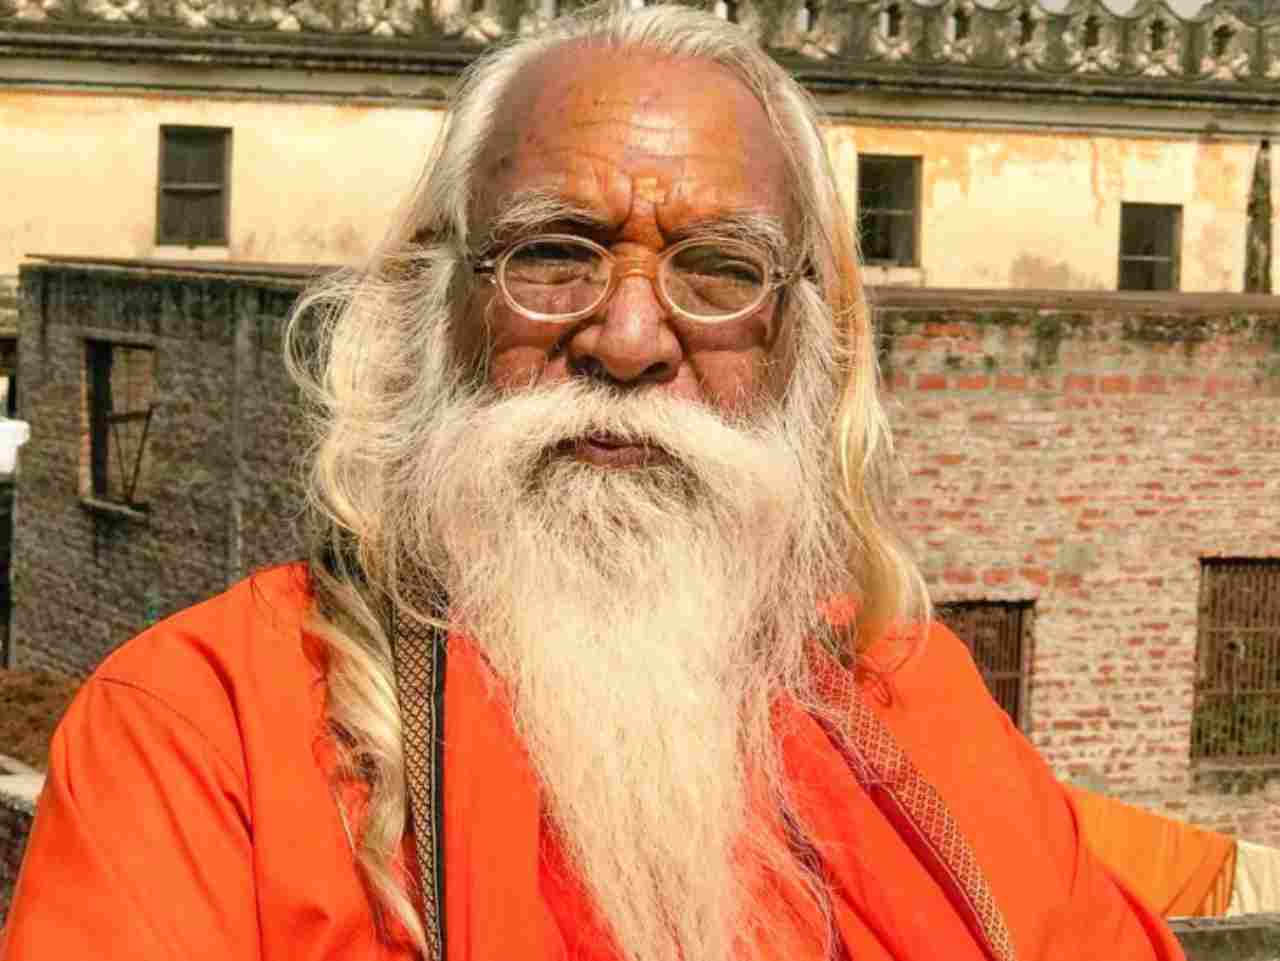 Before consecration, the chief priest of Ram temple got angry